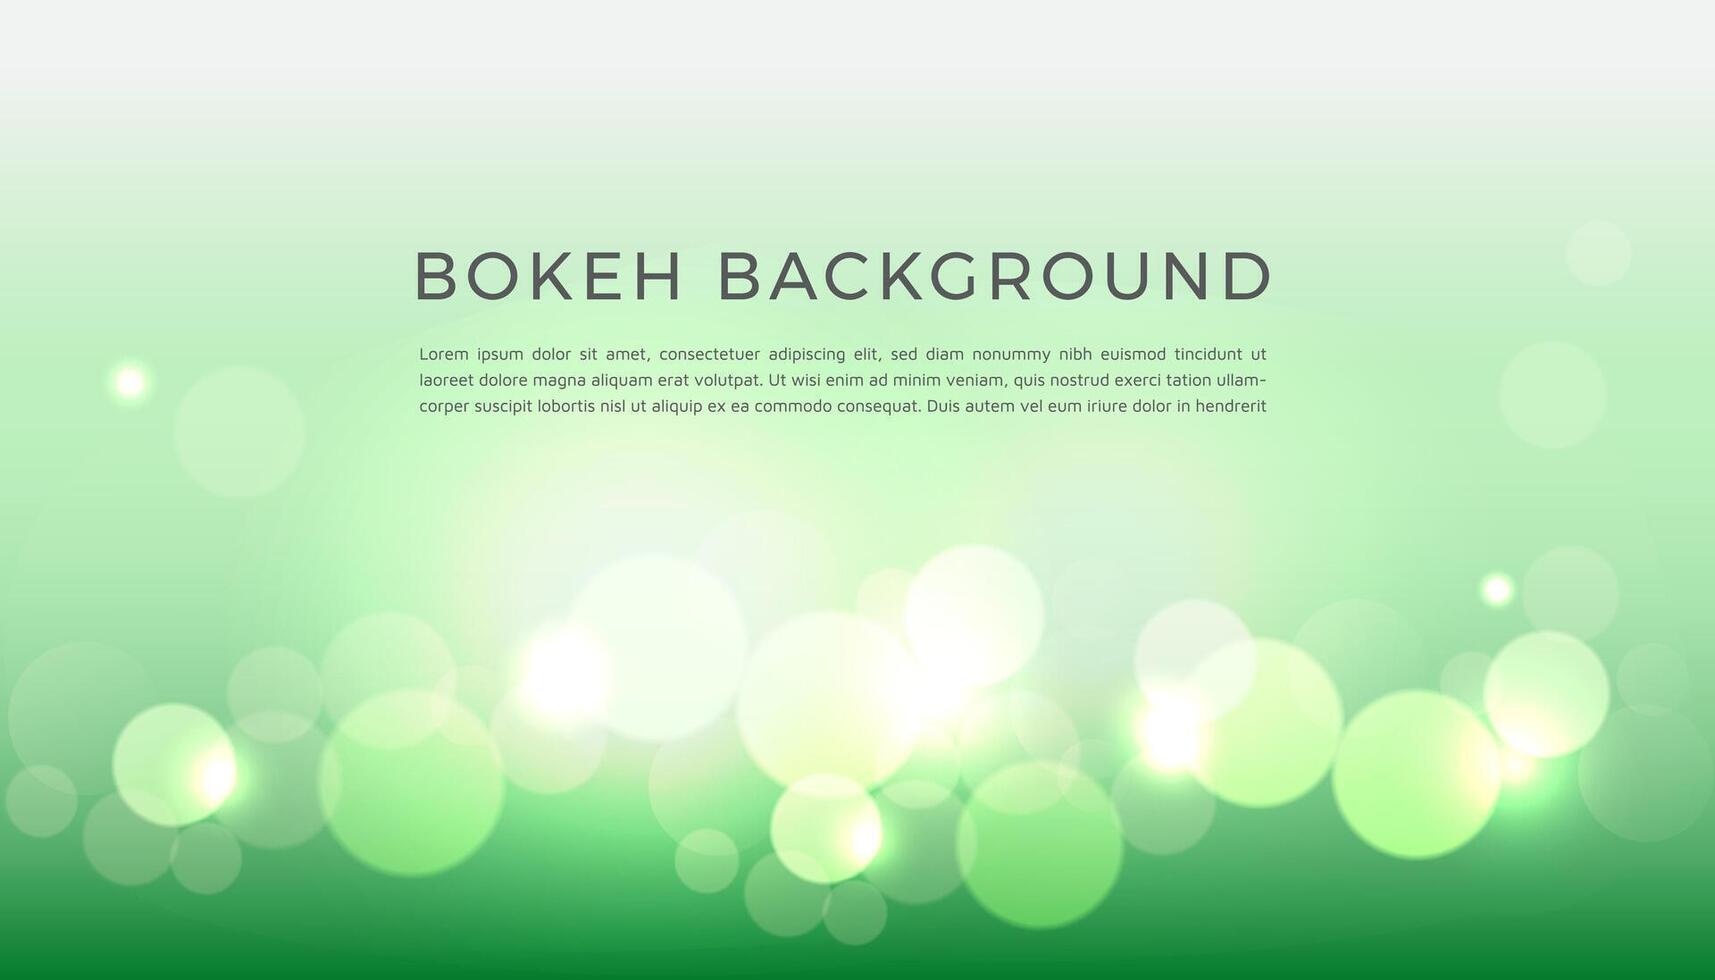 Free Green Background In Bokeh Effect , Blurred Background With Bright Green And White Colors vector